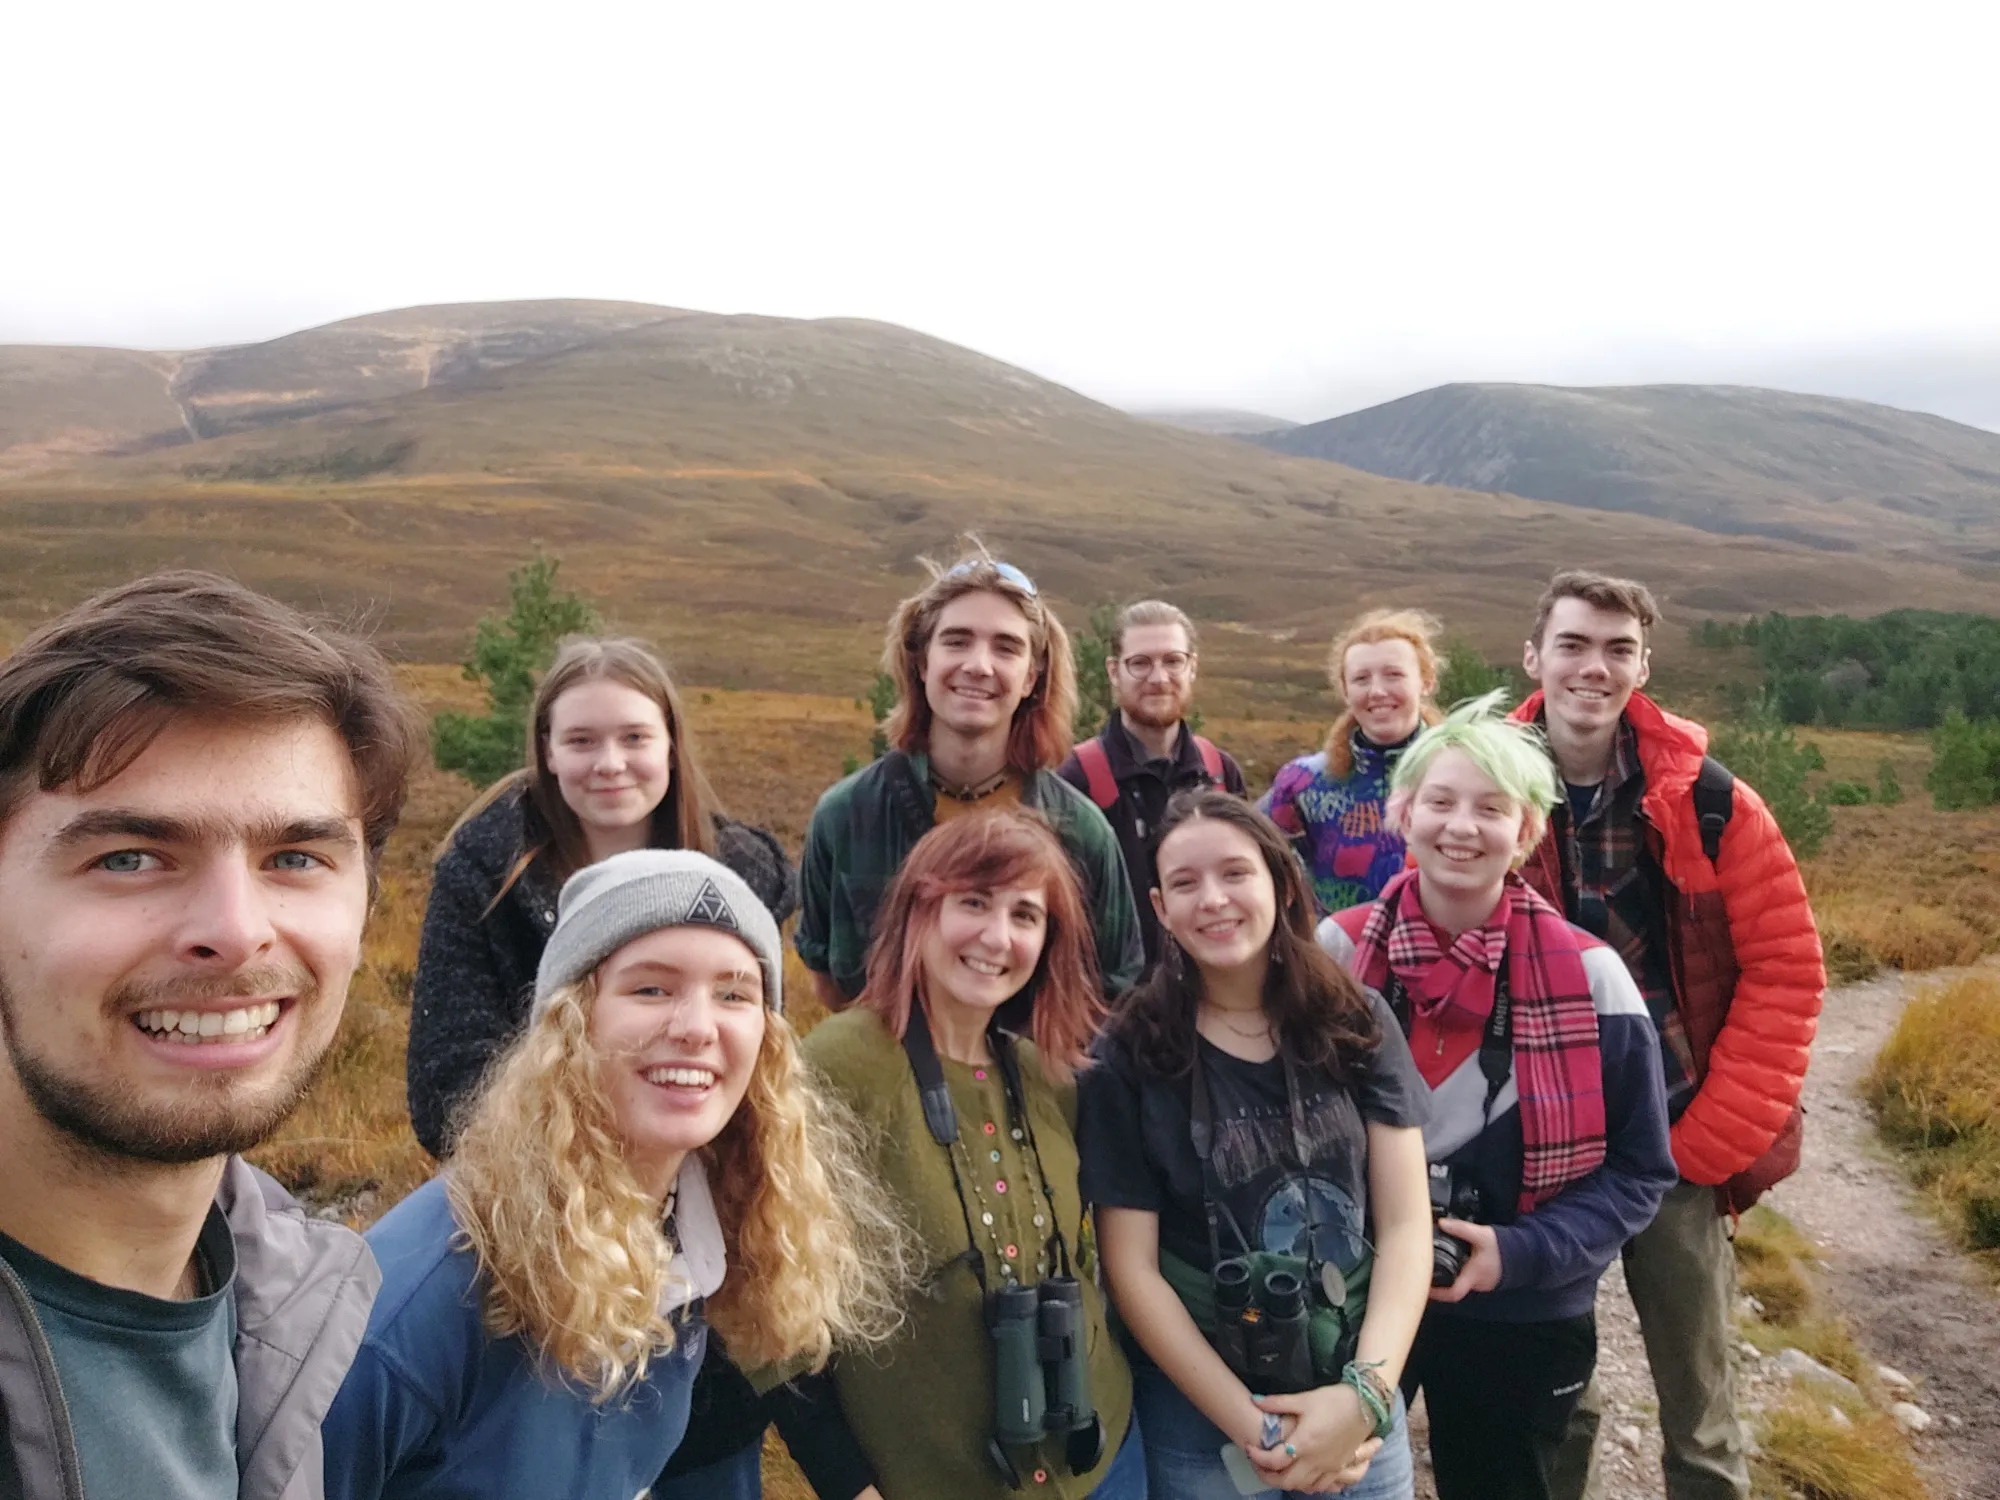 The Youth Council grouped together to take a selfie amongst the hills